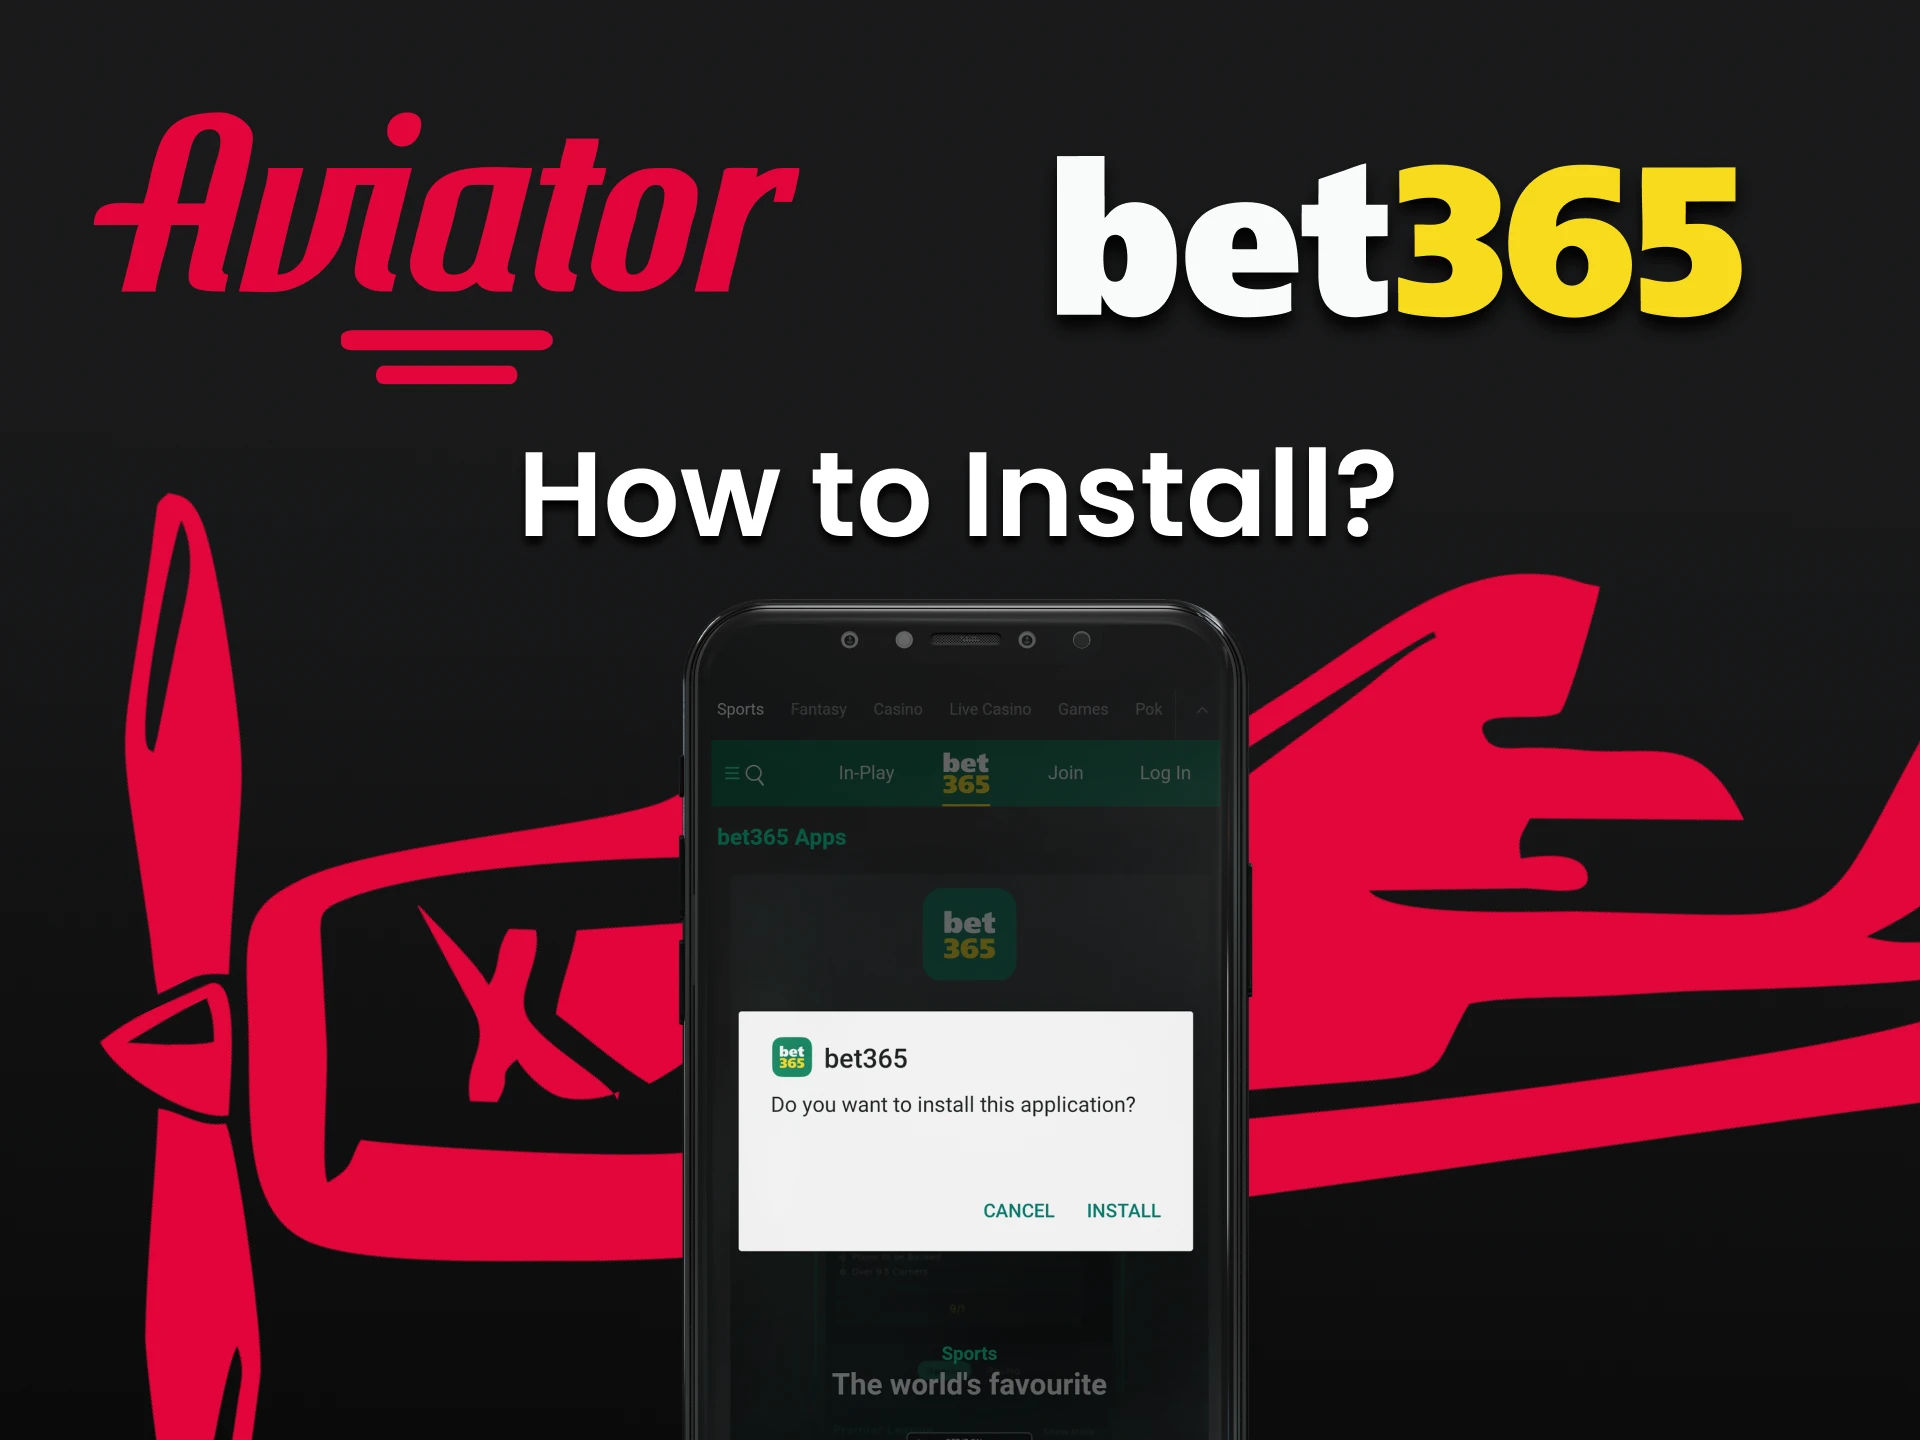 Install the Bet365 application to play Aviator.